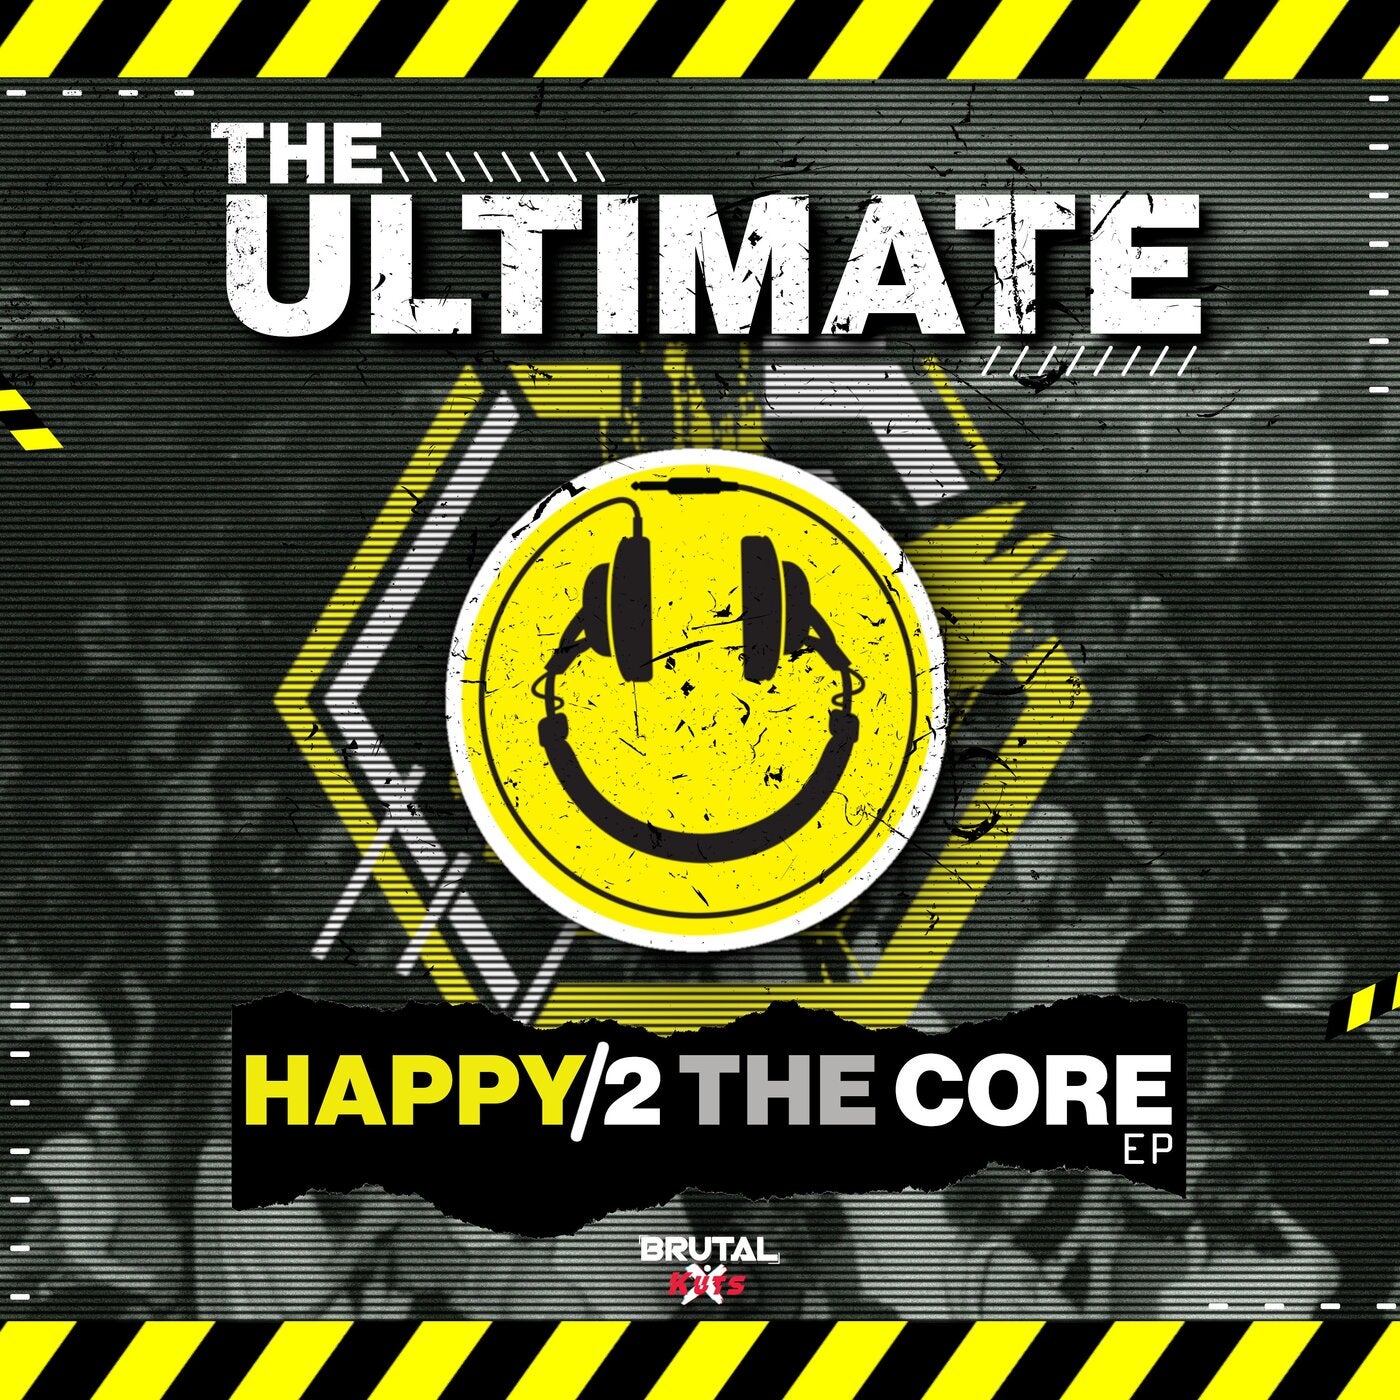 The Ultimate Happy 2 The Core